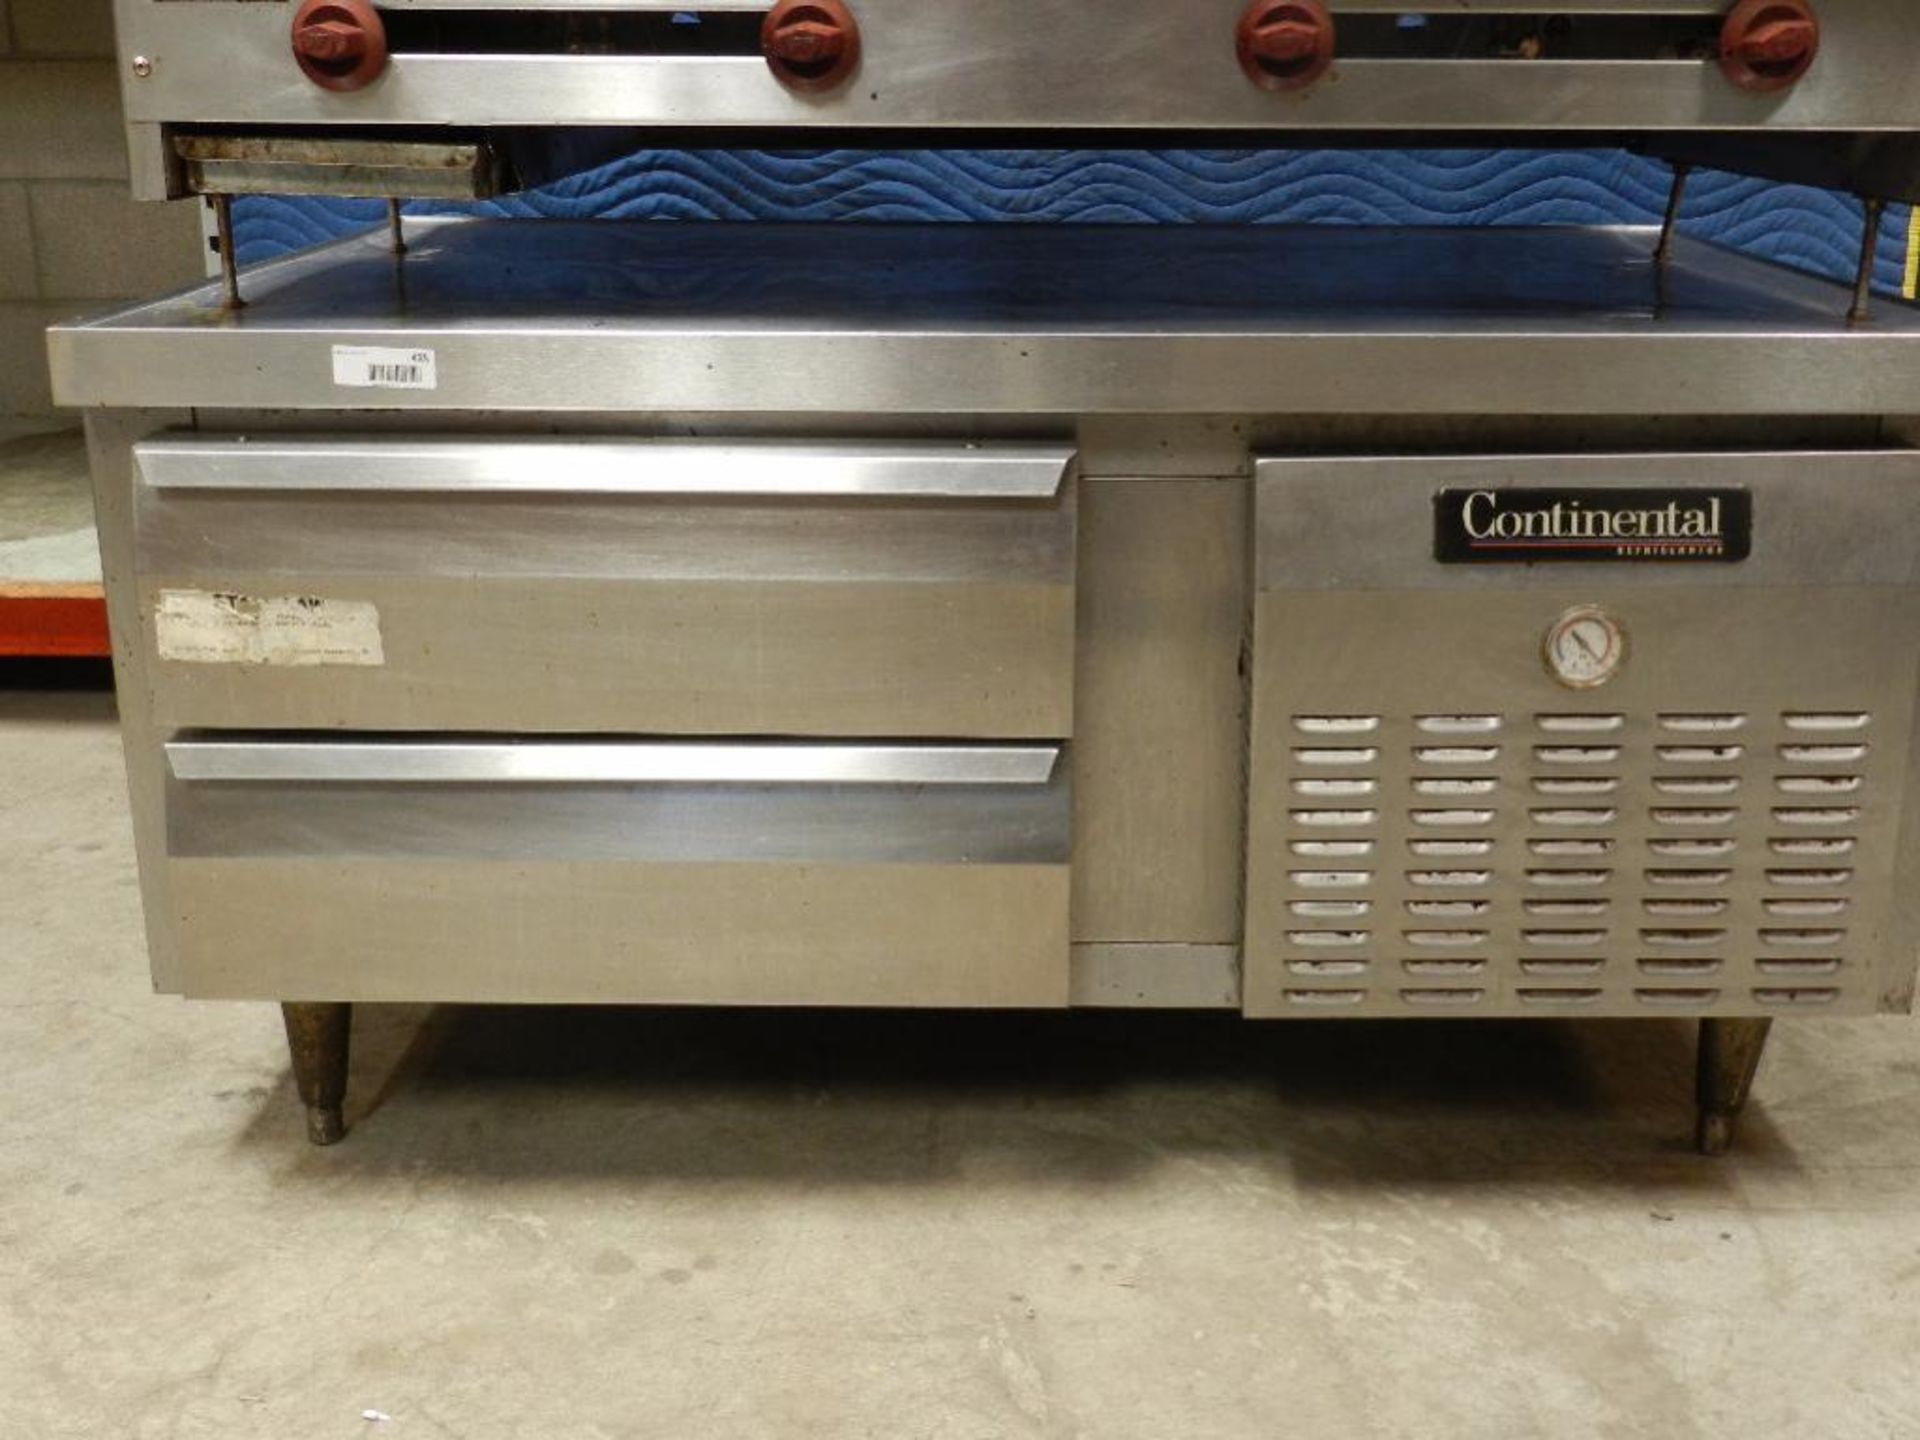 Refrigerated two drawer chef base. stainless steel. Continental make. Trayless.